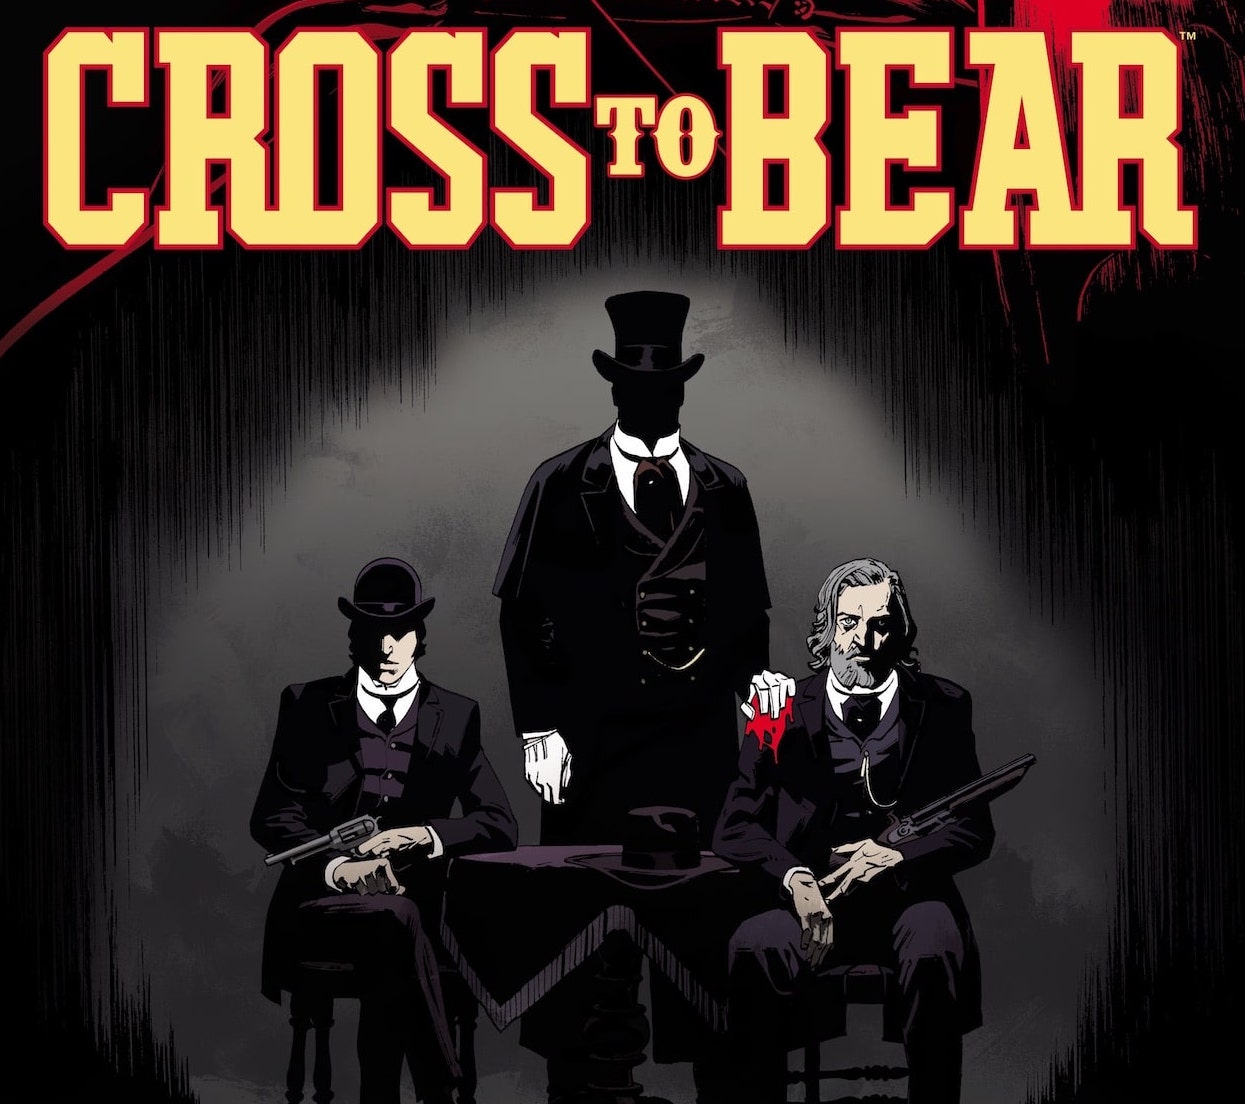 AfterShock First Look: Cross to Bear #1